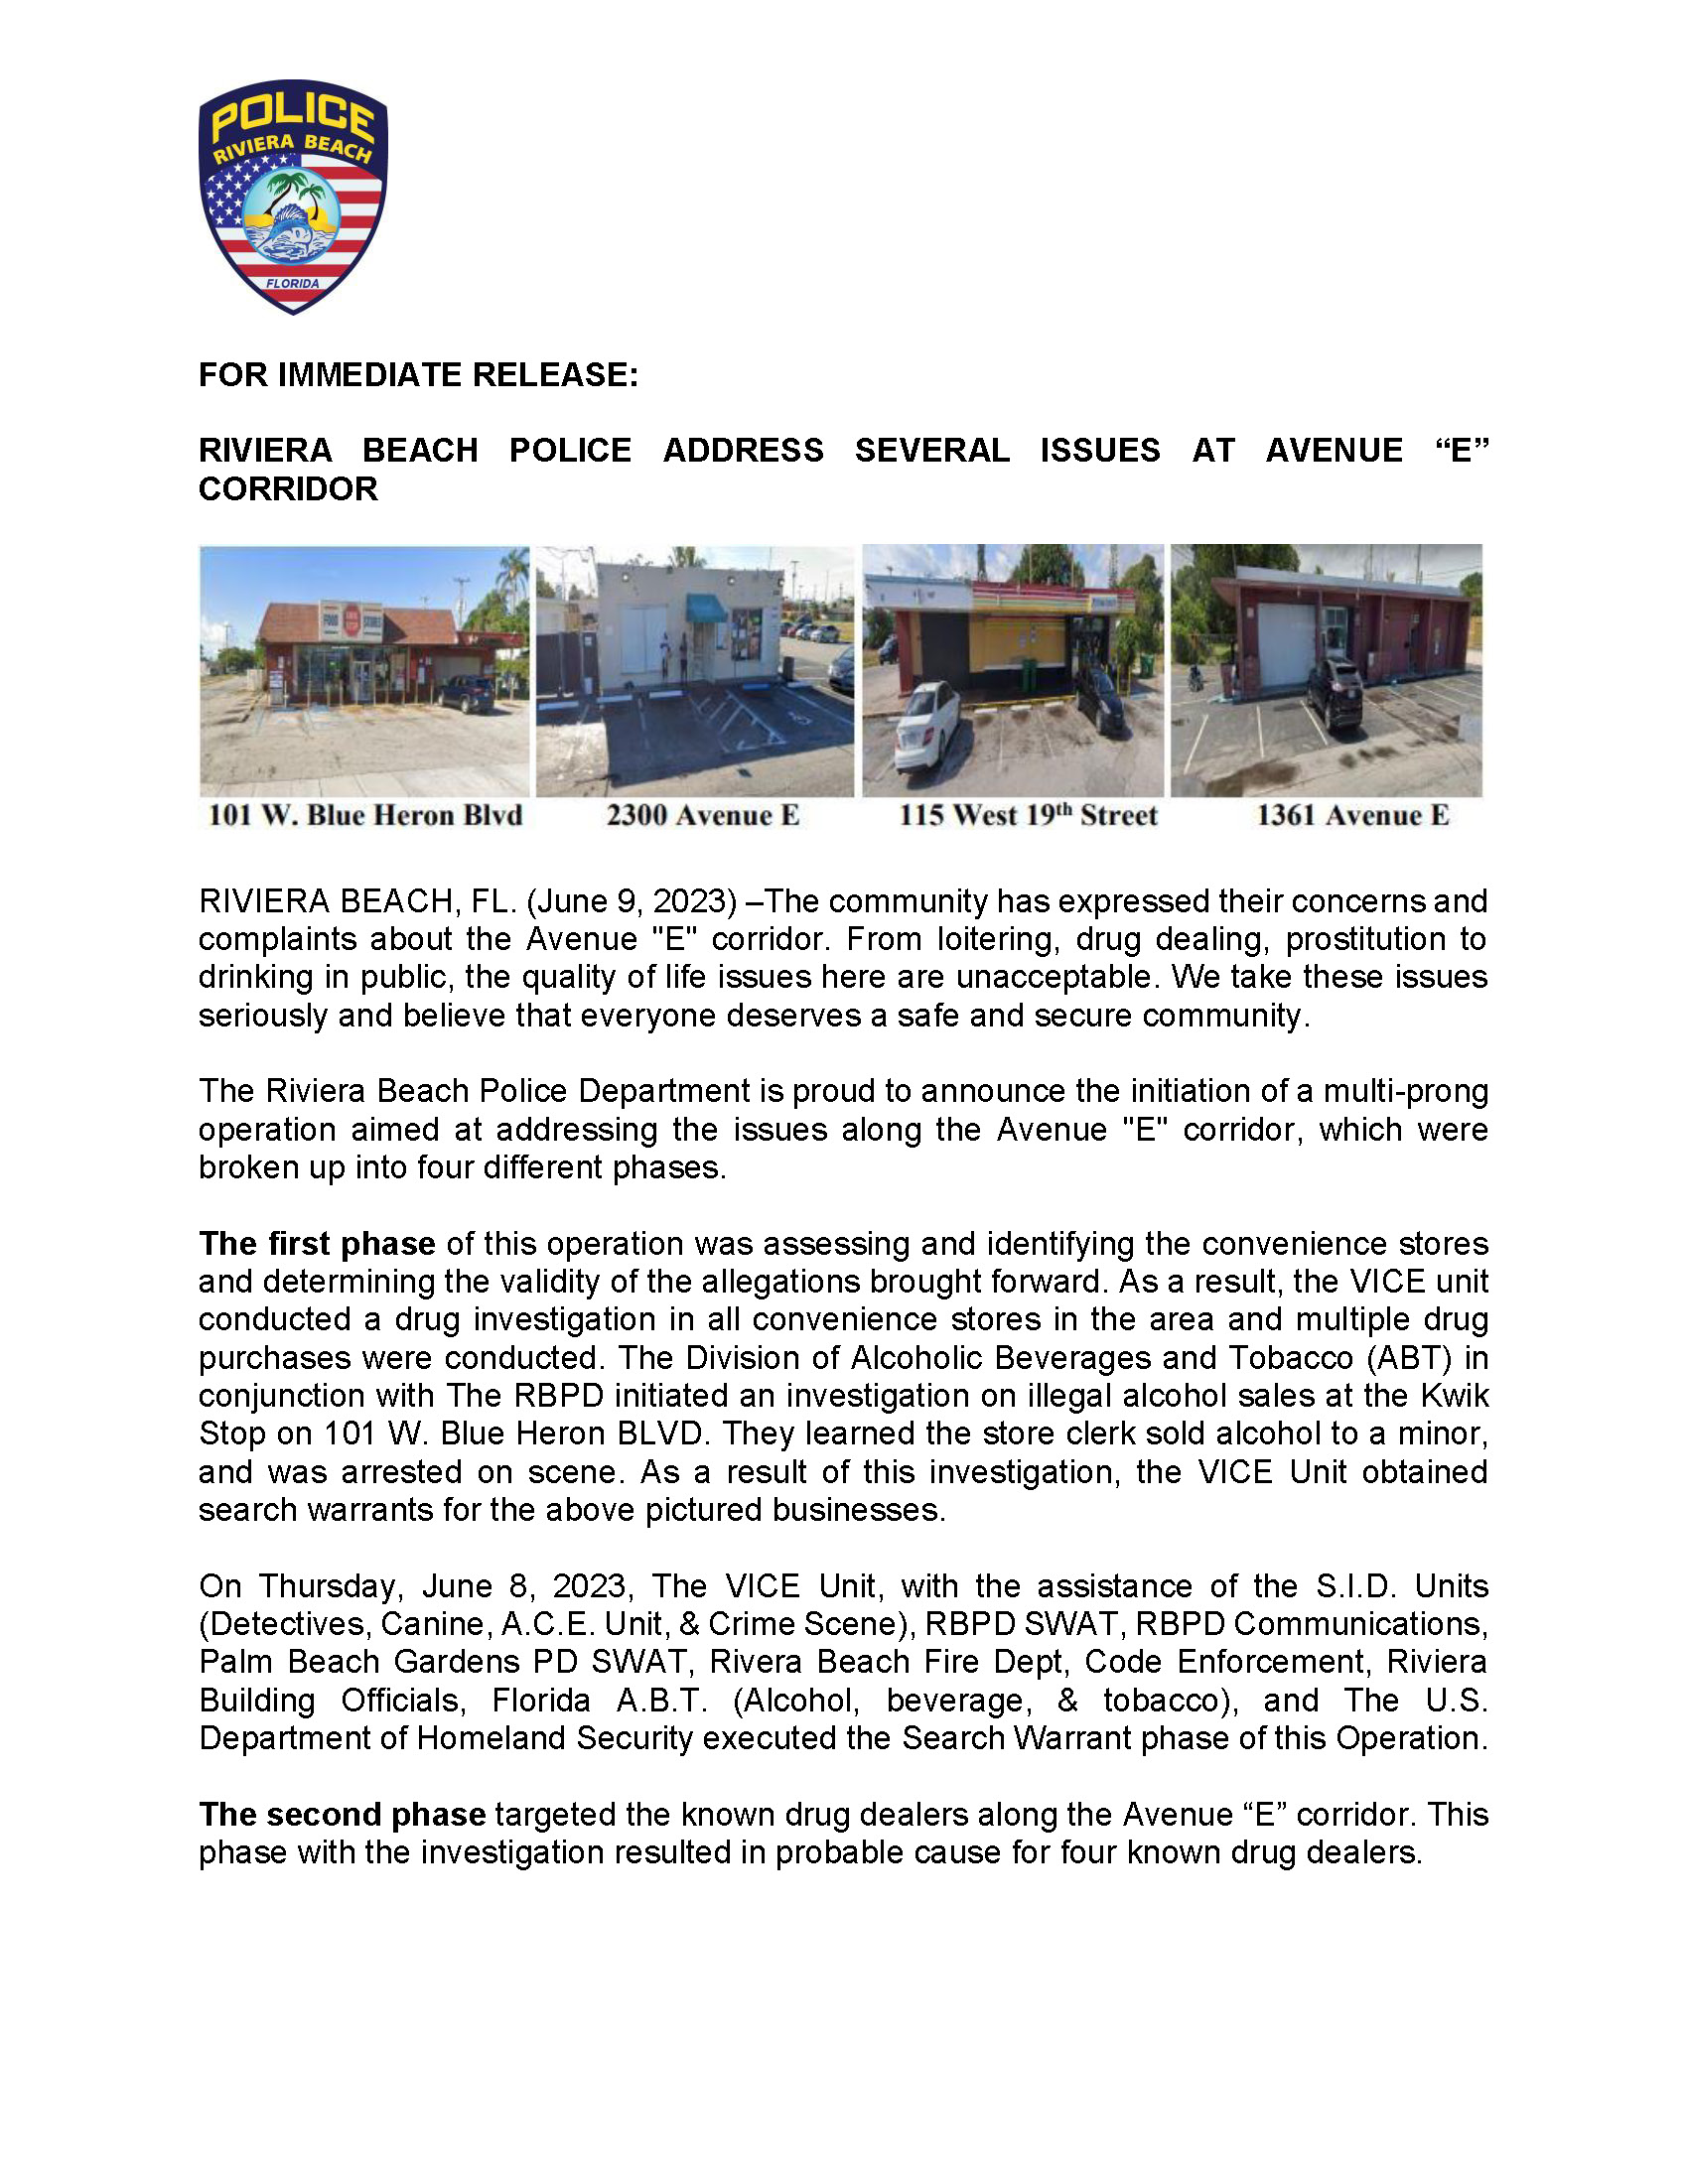 FOR IMMEDIATE RELEASE: RIVIERA BEACH POLICE ADDRESS SEVERAL ISSUES AT AVENUE “E” CORRIDOR RIVIERA BEACH, FL. (June 9, 2023) –The community has expressed their concerns and complaints about the Avenue "E" corridor. From loitering, drug dealing, prostitution to drinking in public, the quality of life issues here are unacceptable. We take these issues seriously and believe that everyone deserves a safe and secure community. The Riviera Beach Police Department is proud to announce the initiation of a multi-prong operation aimed at addressing the issues along the Avenue "E" corridor, which were broken up into four different phases. The first phase of this operation was assessing and identifying the convenience stores and determining the validity of the allegations brought forward. As a result, the VICE unit conducted a drug investigation in all convenience stores in the area and multiple drug purchases were conducted. The Division of Alcoholic Beverages and Tobacco (ABT) in conjunction with The RBPD initiated an investigation on illegal alcohol sales at the Kwik Stop on 101 W. Blue Heron BLVD. They learned the store clerk sold alcohol to a minor, and was arrested on scene. As a result of this investigation, the VICE Unit obtained search warrants for the above pictured businesses. On Thursday, June 8, 2023, The VICE Unit, with the assistance of the S.I.D. Units (Detectives, Canine, A.C.E. Unit, & Crime Scene), RBPD SWAT, RBPD Communications, Palm Beach Gardens PD SWAT, Rivera Beach Fire Dept, Code Enforcement, Riviera Building Officials, Florida A.B.T. (Alcohol, beverage, & tobacco), and The U.S. Department of Homeland Security executed the Search Warrant phase of this Operation. The second phase targeted the known drug dealers along the Avenue “E” corridor. This phase with the investigation resulted in probable cause for four known drug dealers. Also, on Wednesday, June 7, 2023 around the evening hours, the RBPD Vice Unit executed a single-phase prostitution sting with the assistance of the RBPD Ace Unit, which was the third phase. The Riviera Beach Police Department received several complaints from residents and the Patrol Division concerning prostitution activity on the Broadway and Avenue E corridor. Based on the complaints, the VICE Unit, under the direction of the S.I.D Command Staff, initiated an undercover Prostitution Operation to address the issue. With the assistance of Officers from the ACE Team, the VICE Unit arrested the five subjects listed above for Prostitution contrary to Florida State law. Concerning the arrestees, we charged three of the five defendants with Felony Prostitution due to previous convictions for the same offense. The fourth and final phase included initiating chronic nuisance abatement proceedings of the four convenient stores. The following below was the outcome of our investigation: ? Kwik Stop, located at 101 West Blue Heron Boulevard. ? Nine FL ABT Violations. ? Four Code Enforcement Violations. ? Store cook Baldomero Cruz (h/m, 12/18/1962) arrested by Border Patrol (Illegal Alien). ? Yassir Food Market, located at 2300 Avenue E. ? Fifteen FL ABT Violations. ? Four Fire Safety Violations. ? ACE Unit recovered firearm from patron. Arrest pending DNA results. Suspect Wayne J. Wynds (other/m, 01-17-1966). ? Mid-Town Food Market, located at 115 West 19th ? Six FL ABT Violations. ? Numerous Code Enforcement and building violations. ? Recovered Stolen firearm and Marijuana discovered in store clerk area behind the counter. ? Store clerk Ahmend Omar (other/m, 03-11-1970) arrested by Border patrol (Illegal Alien). ? Drug dealer Alexis Crockett (b/f, 01-28-1985) arrested for Sale of Cocaine (Agent direct). ? Drug dealer Matthew Gaines (b/m, 09-28-1981) arrested for Sale of Cocaine (Agent direct). ? Building Official Bo Richards issued violation under Section 22-35 of the City Code, which deemed the premises unsafe for human occupancy. The store was closed down immediately. ? Avenue E Market, located at 1361 Avenue E. ? This location received one code enforcement violation. The Health Department will conduct a follow-up inspection of all stores next week. If anyone has information about organized criminal activity, don't hesitate to contact our VICE Agents. “We want all the stores to thrive and provide quality service to the community,” said Police Chief Michael Coleman. “The Police Department will target the negative activities that occur at all of the stores. Business owners must do a better job in policing their property, and we are here to assist.” The Riviera Beach Police Department remains committed to enhancing the safety and security of the Avenue "E" corridor and the entire Riviera Beach community. Contact: Brittany Collins Public Information Officer bcollins@rivierabeach.org Cell: 561-371-1533